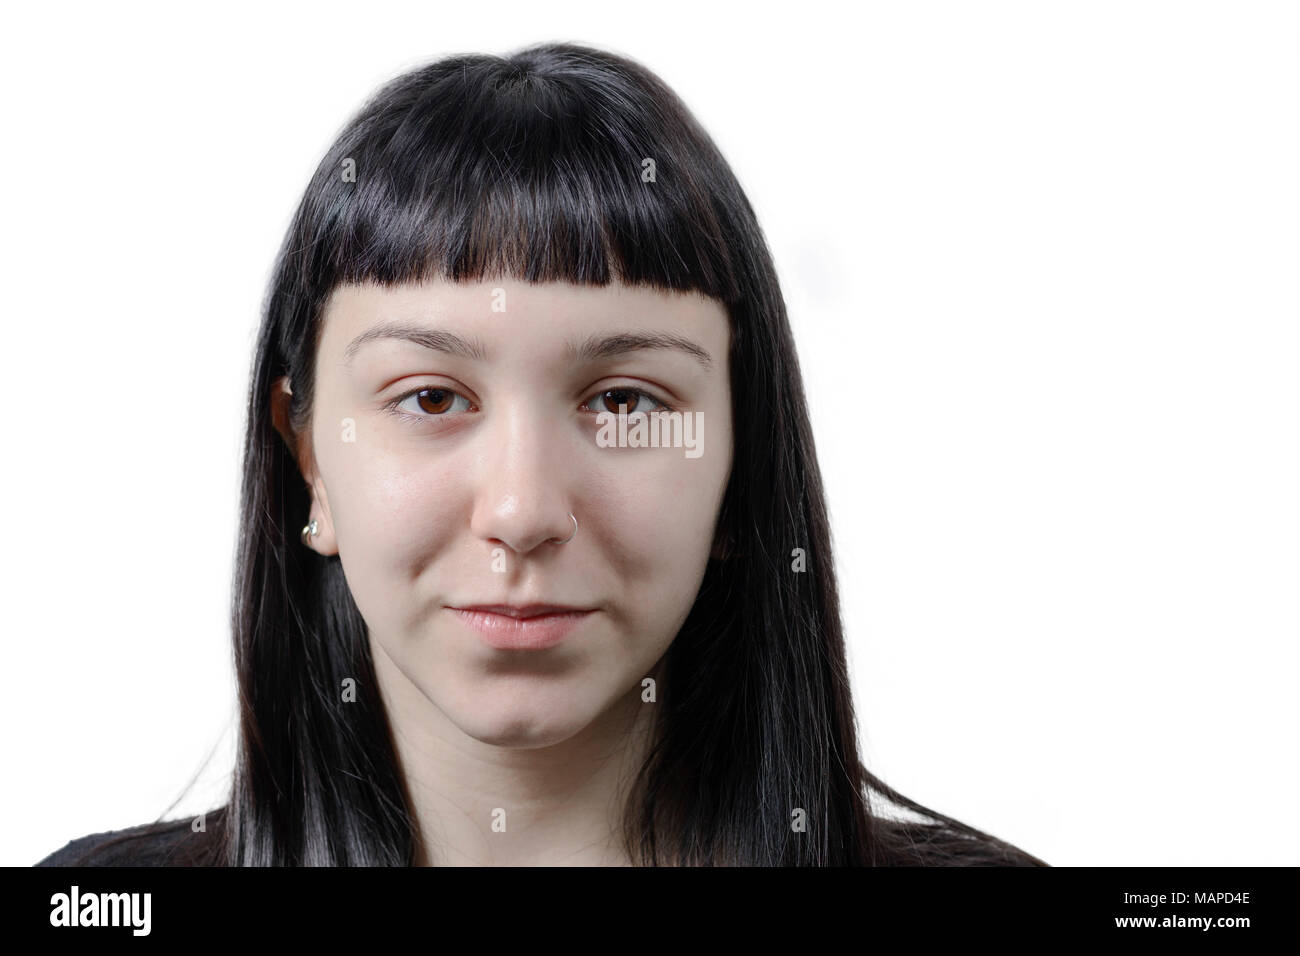 Portrait of a young woman with pierced nose. Brown eyes. Stock Photo